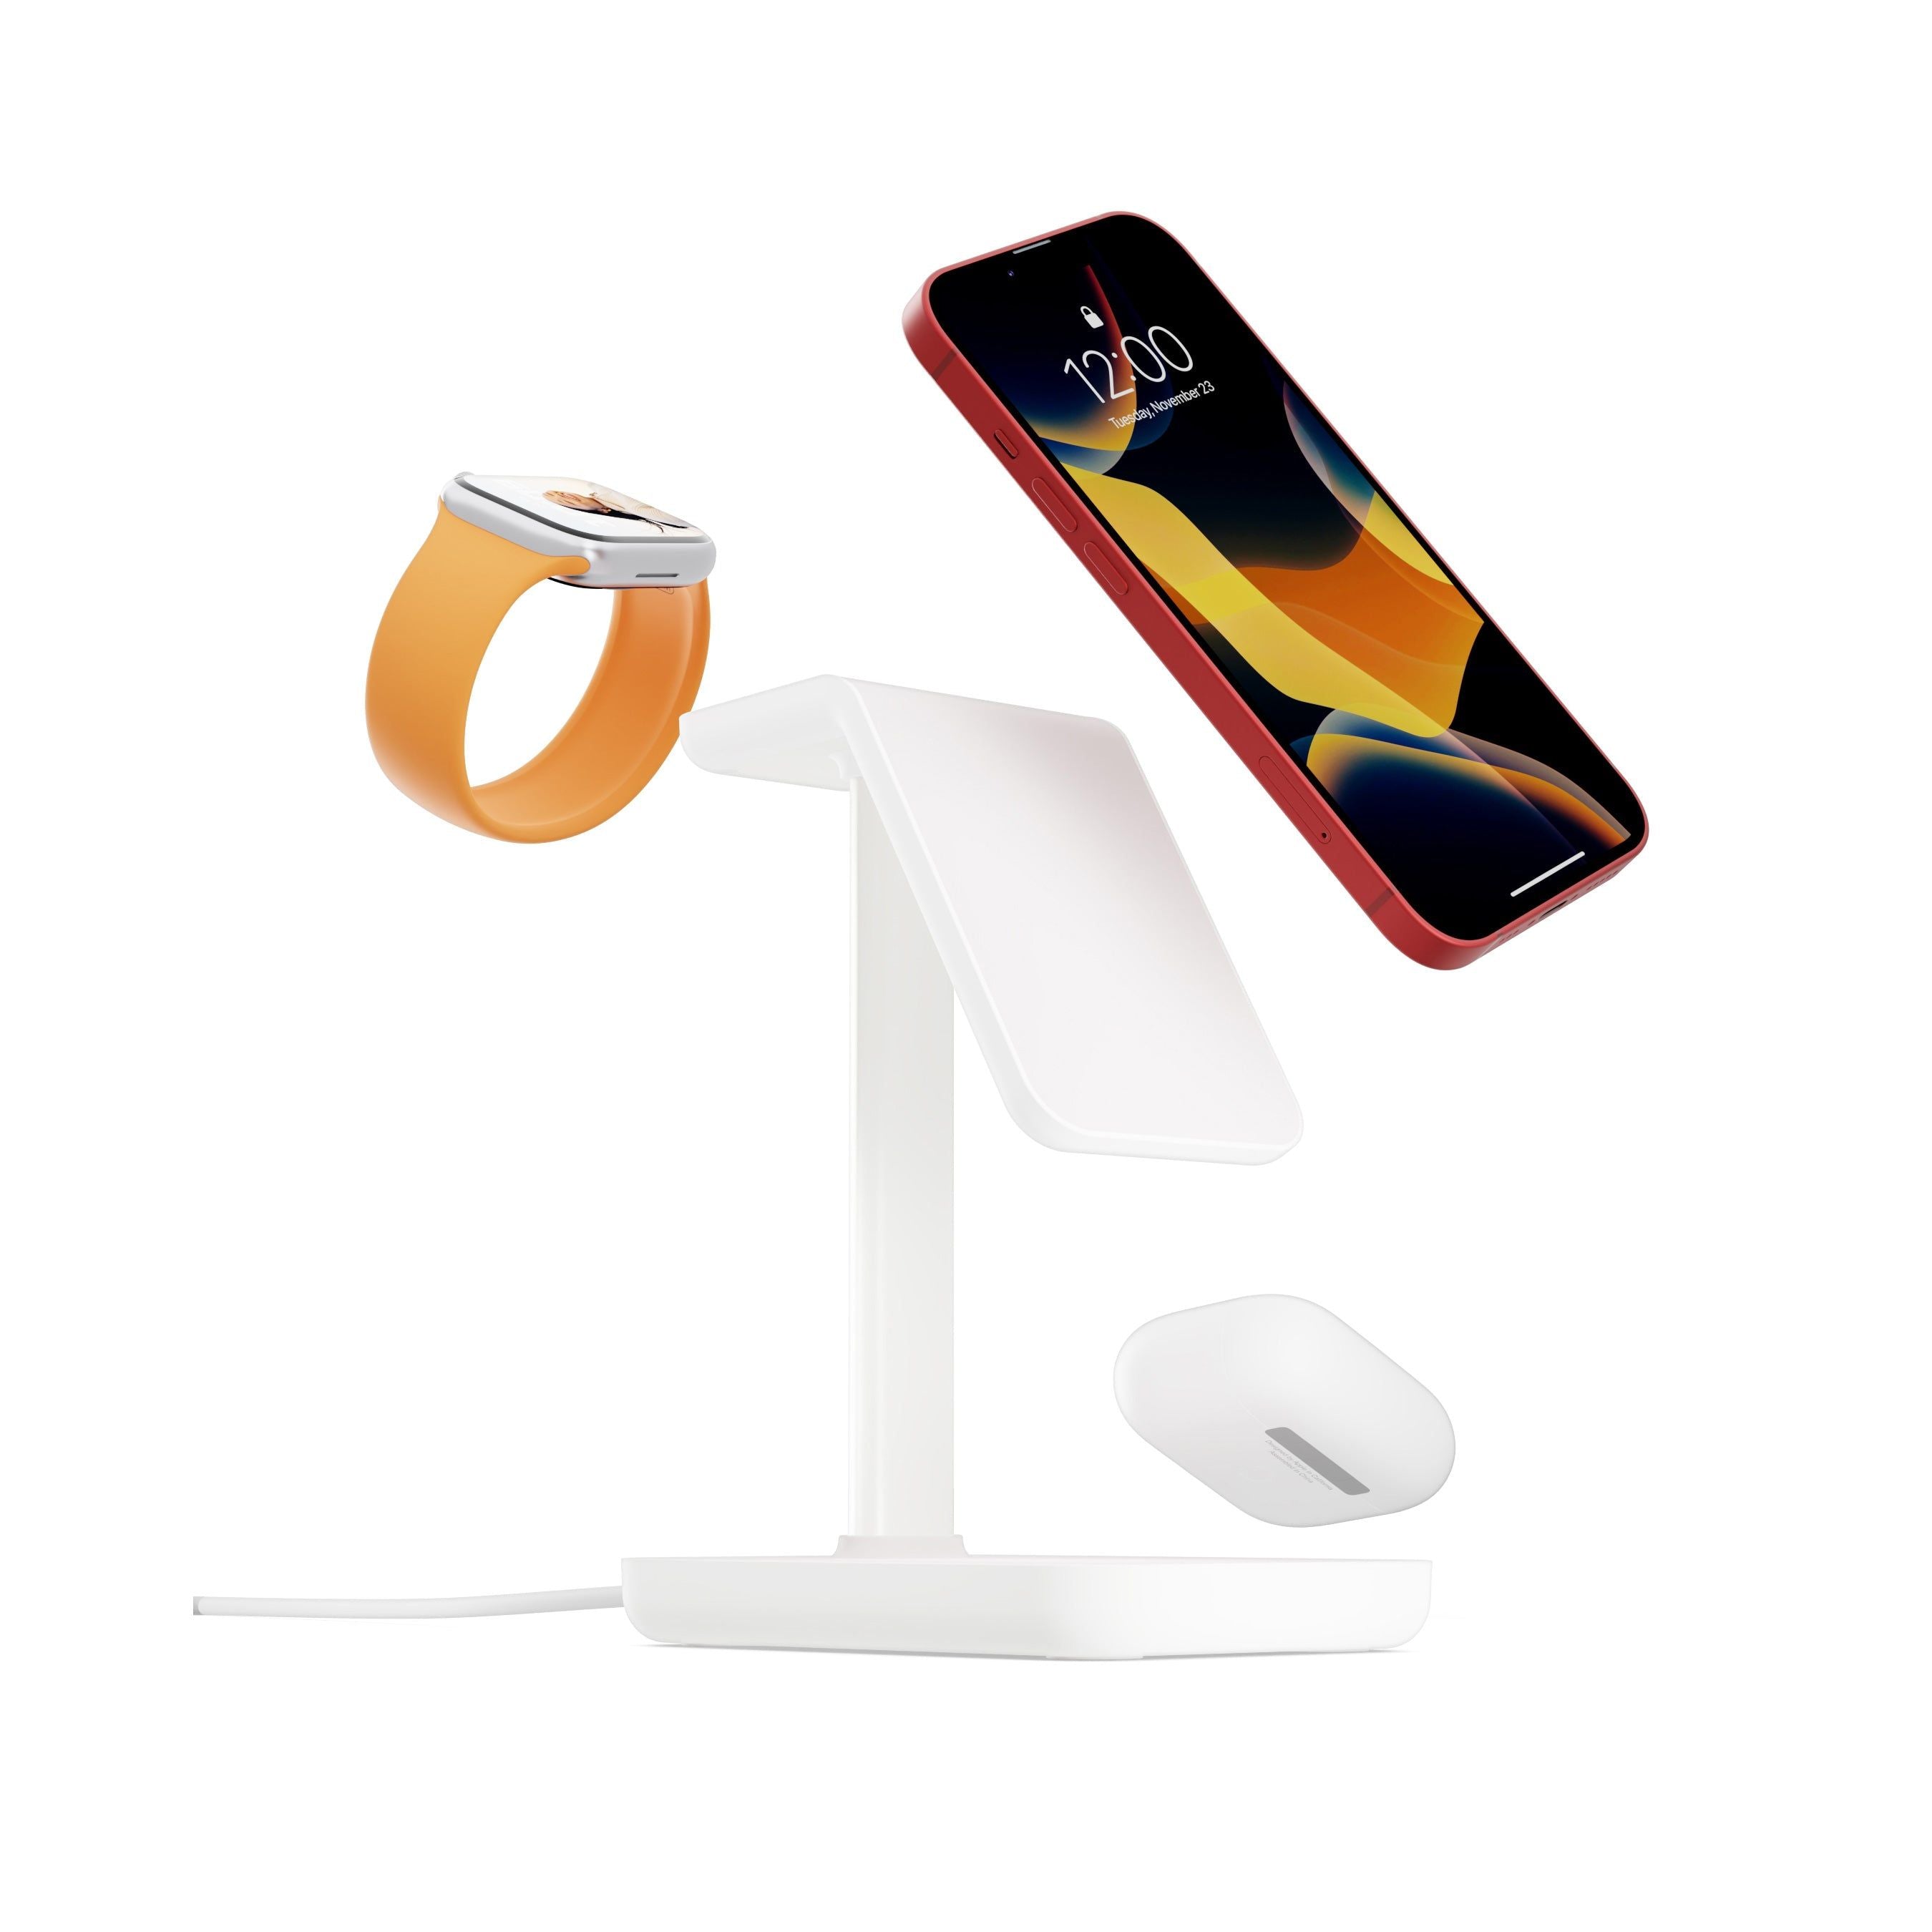 Image of HiRise 3 Wireless Charging Stand